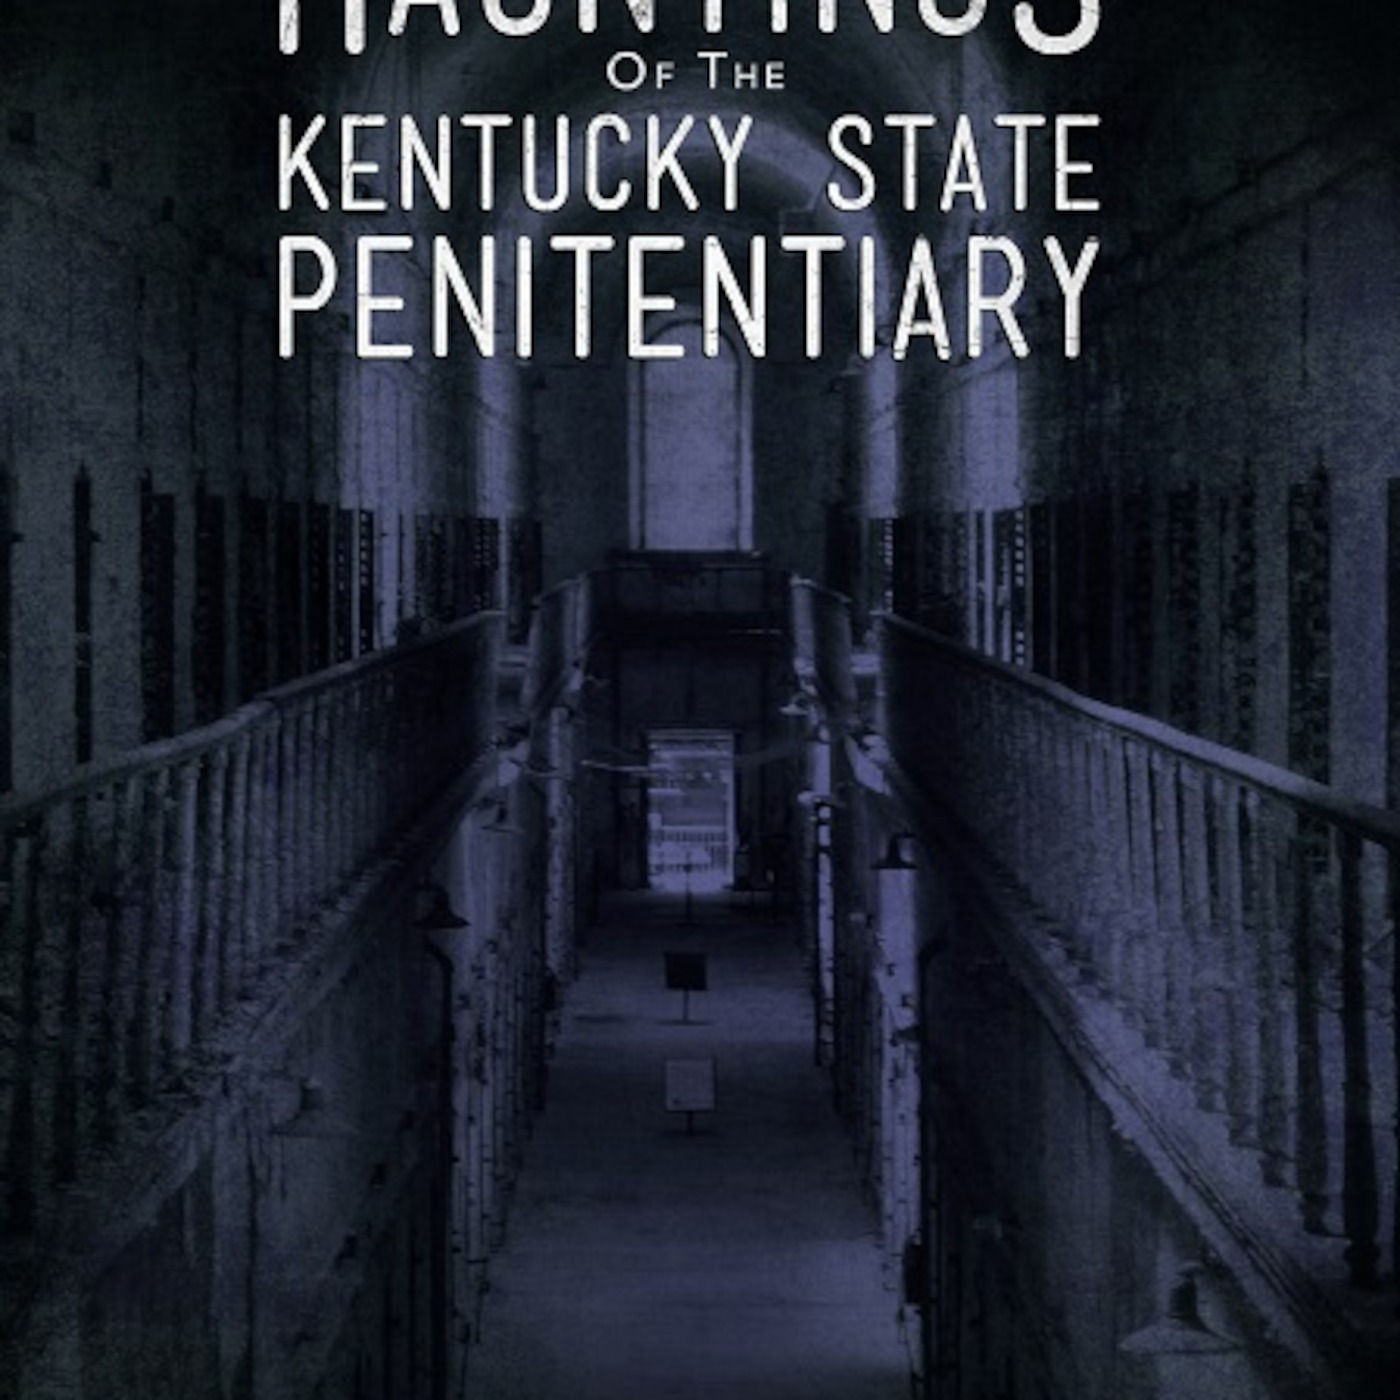 5/21/2017 Steve Asher and the Hauntings of the Kentucky State Penitentiary